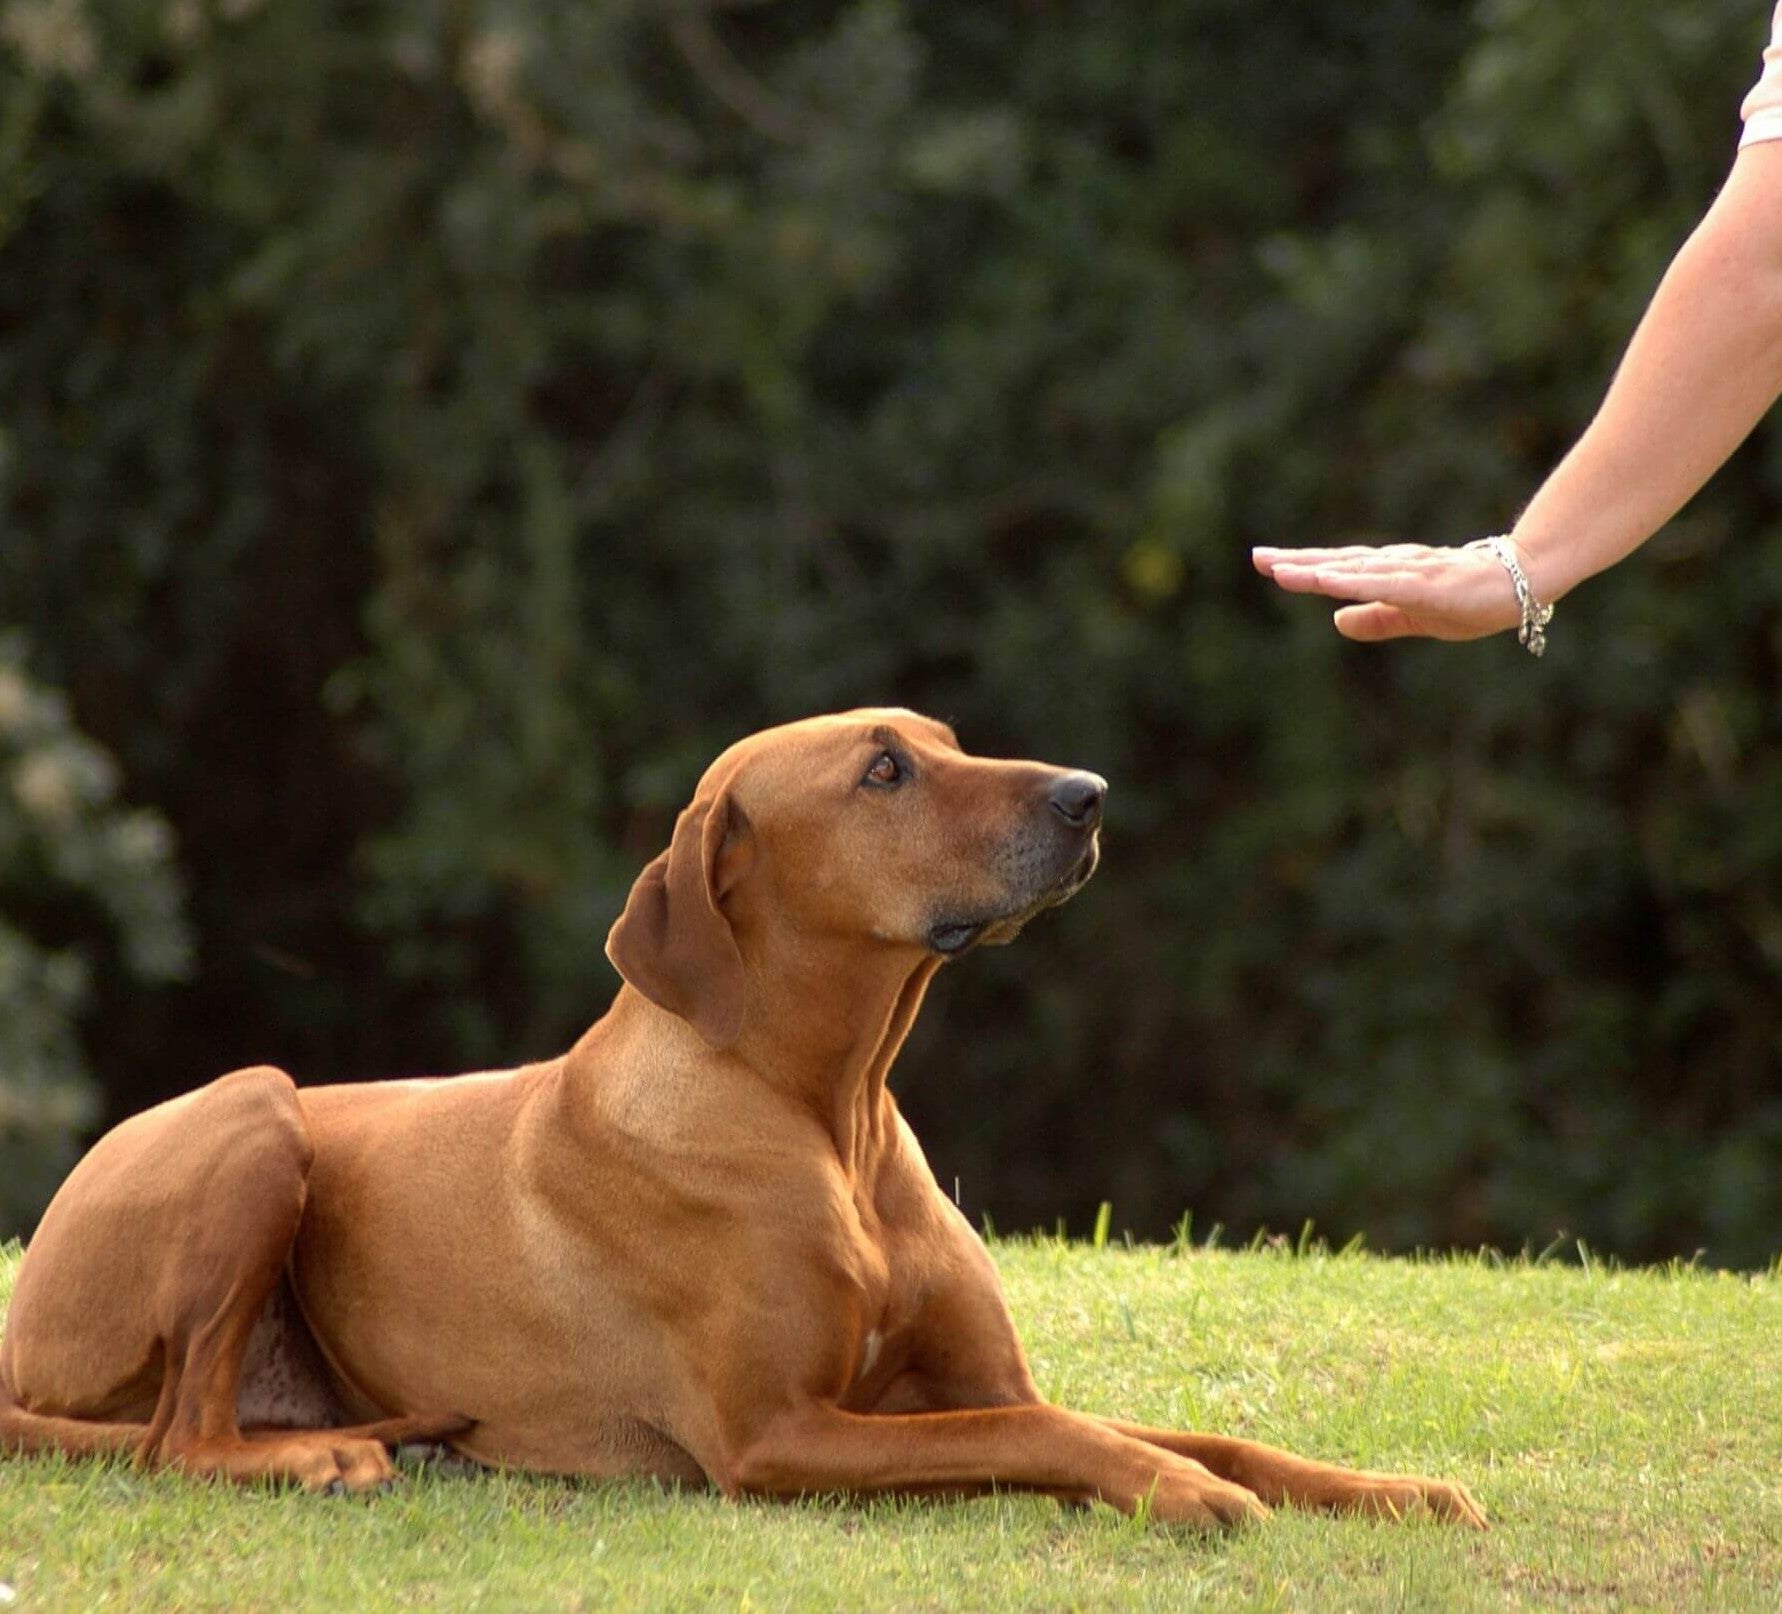 Every dog needs training and experts recommend our dog training techniques to teach your pet the right cues and behaviors. Get started with dog training today!